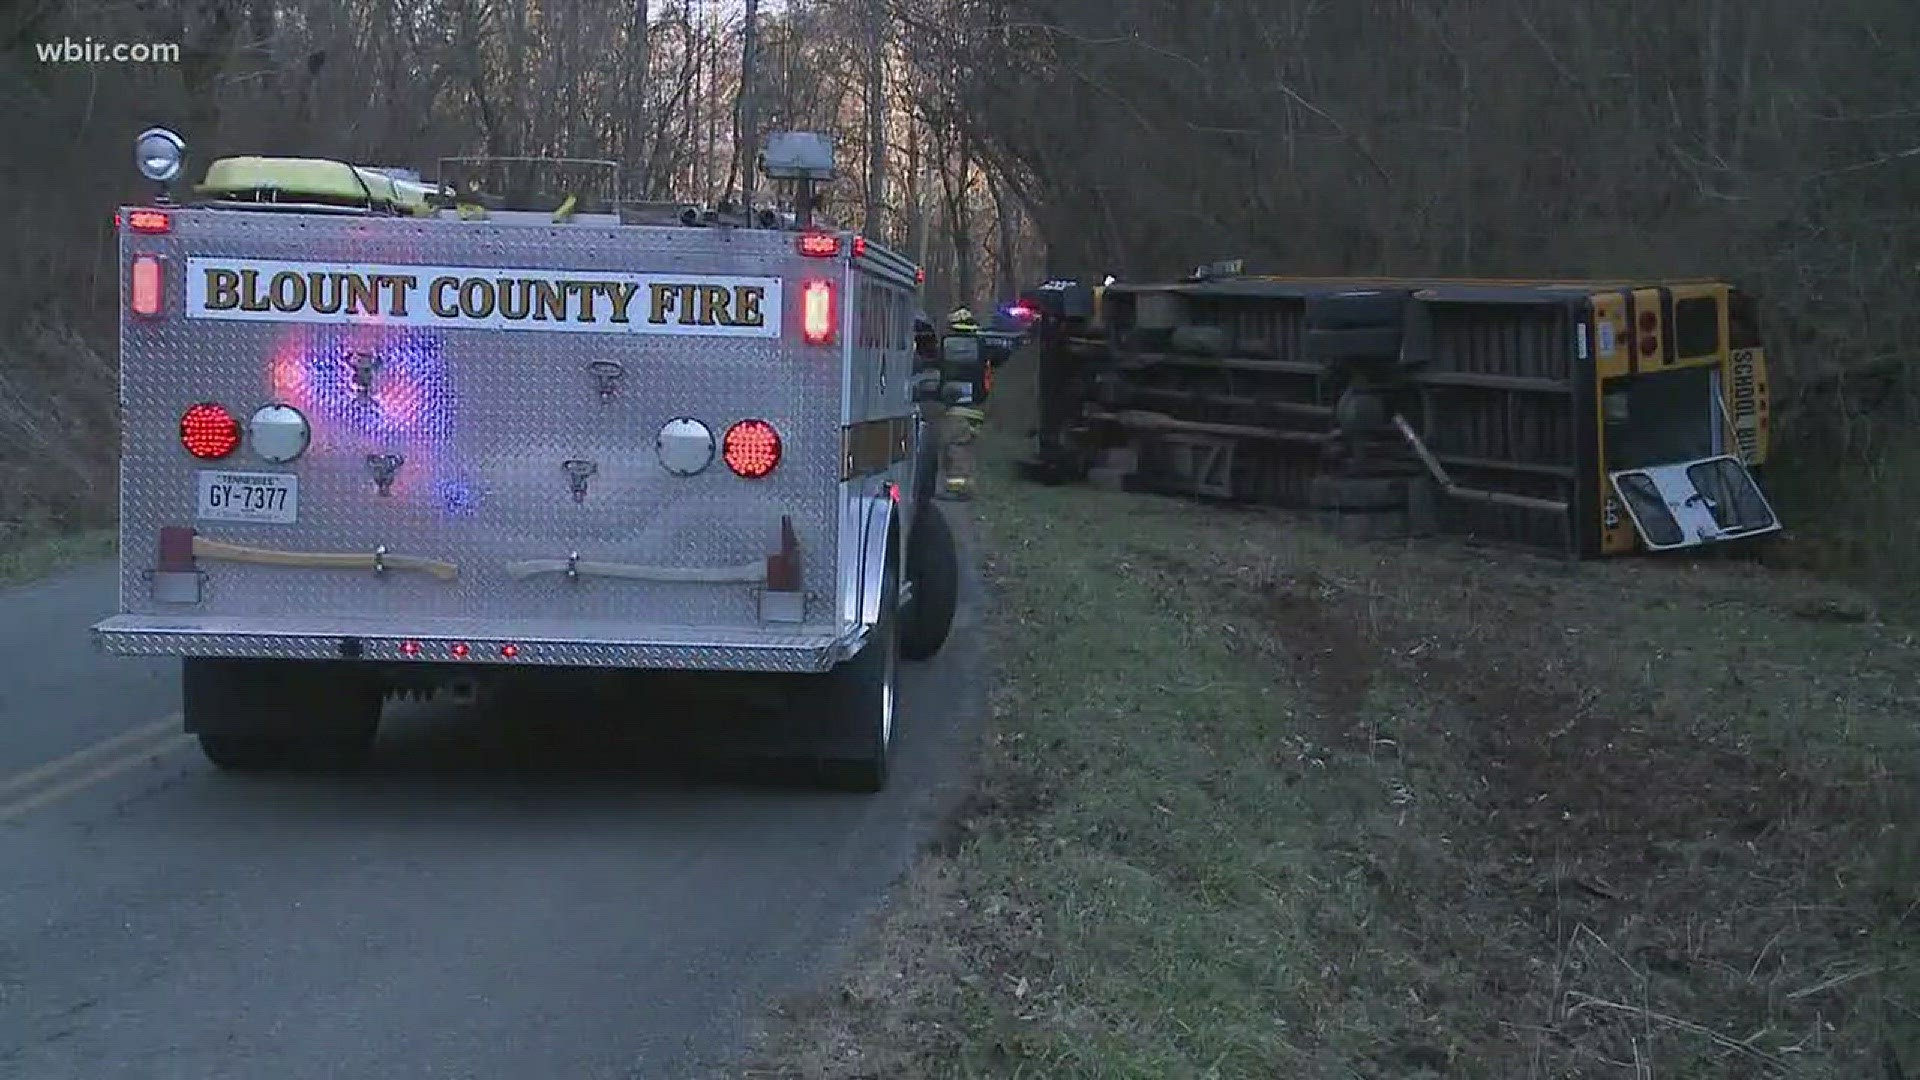 Jan. 31, 2018: No students were on board when a school bus crashed in Blount County.